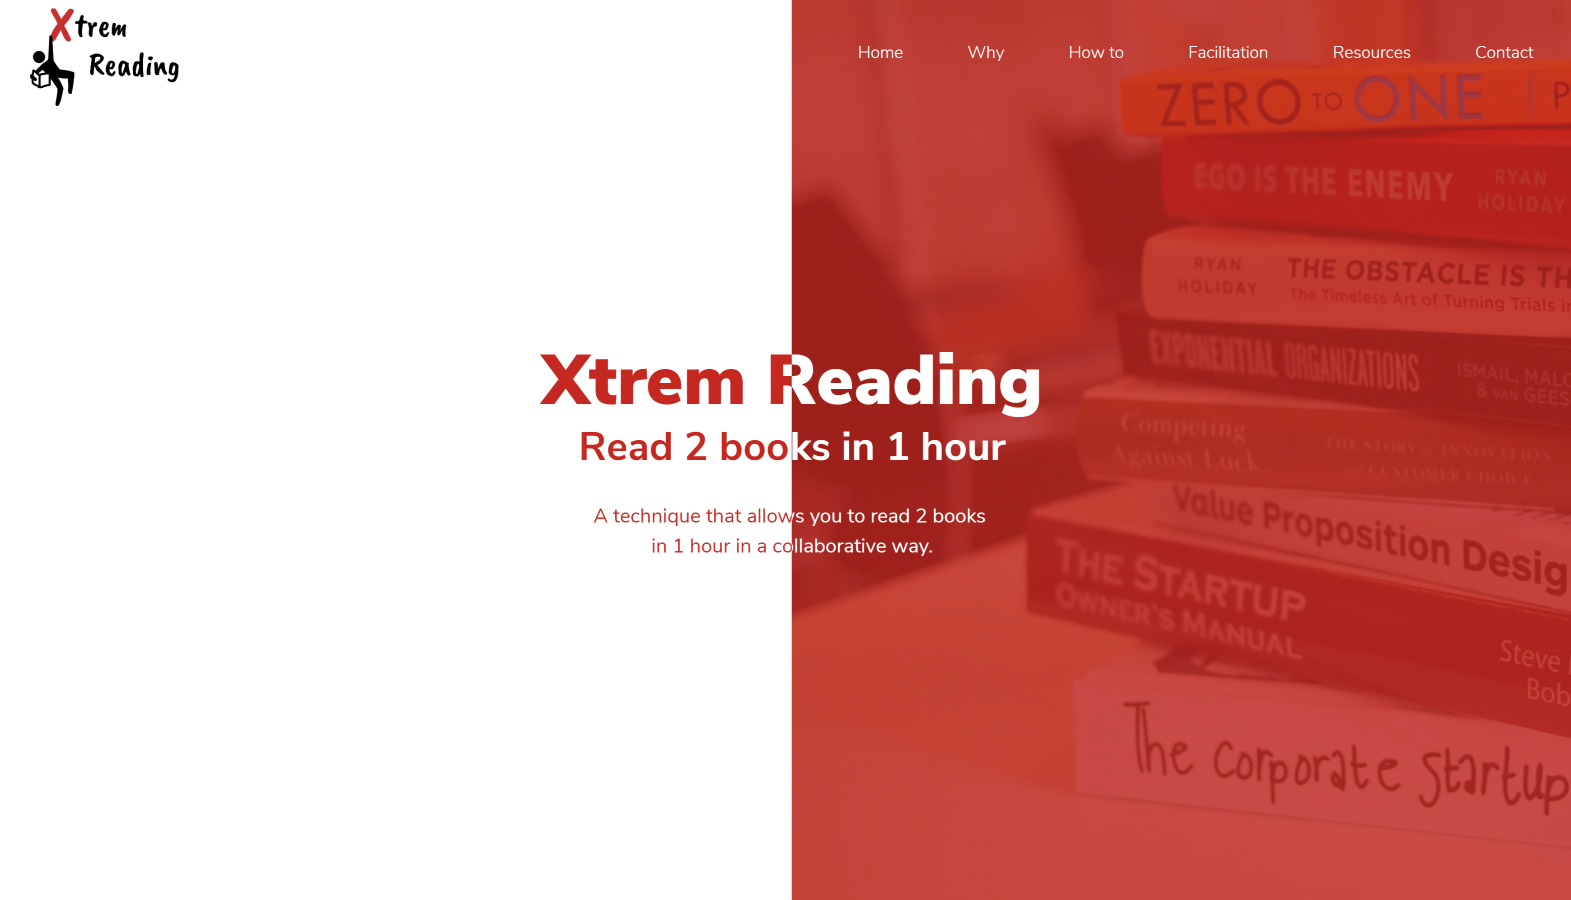 Our Xtrem Reading website